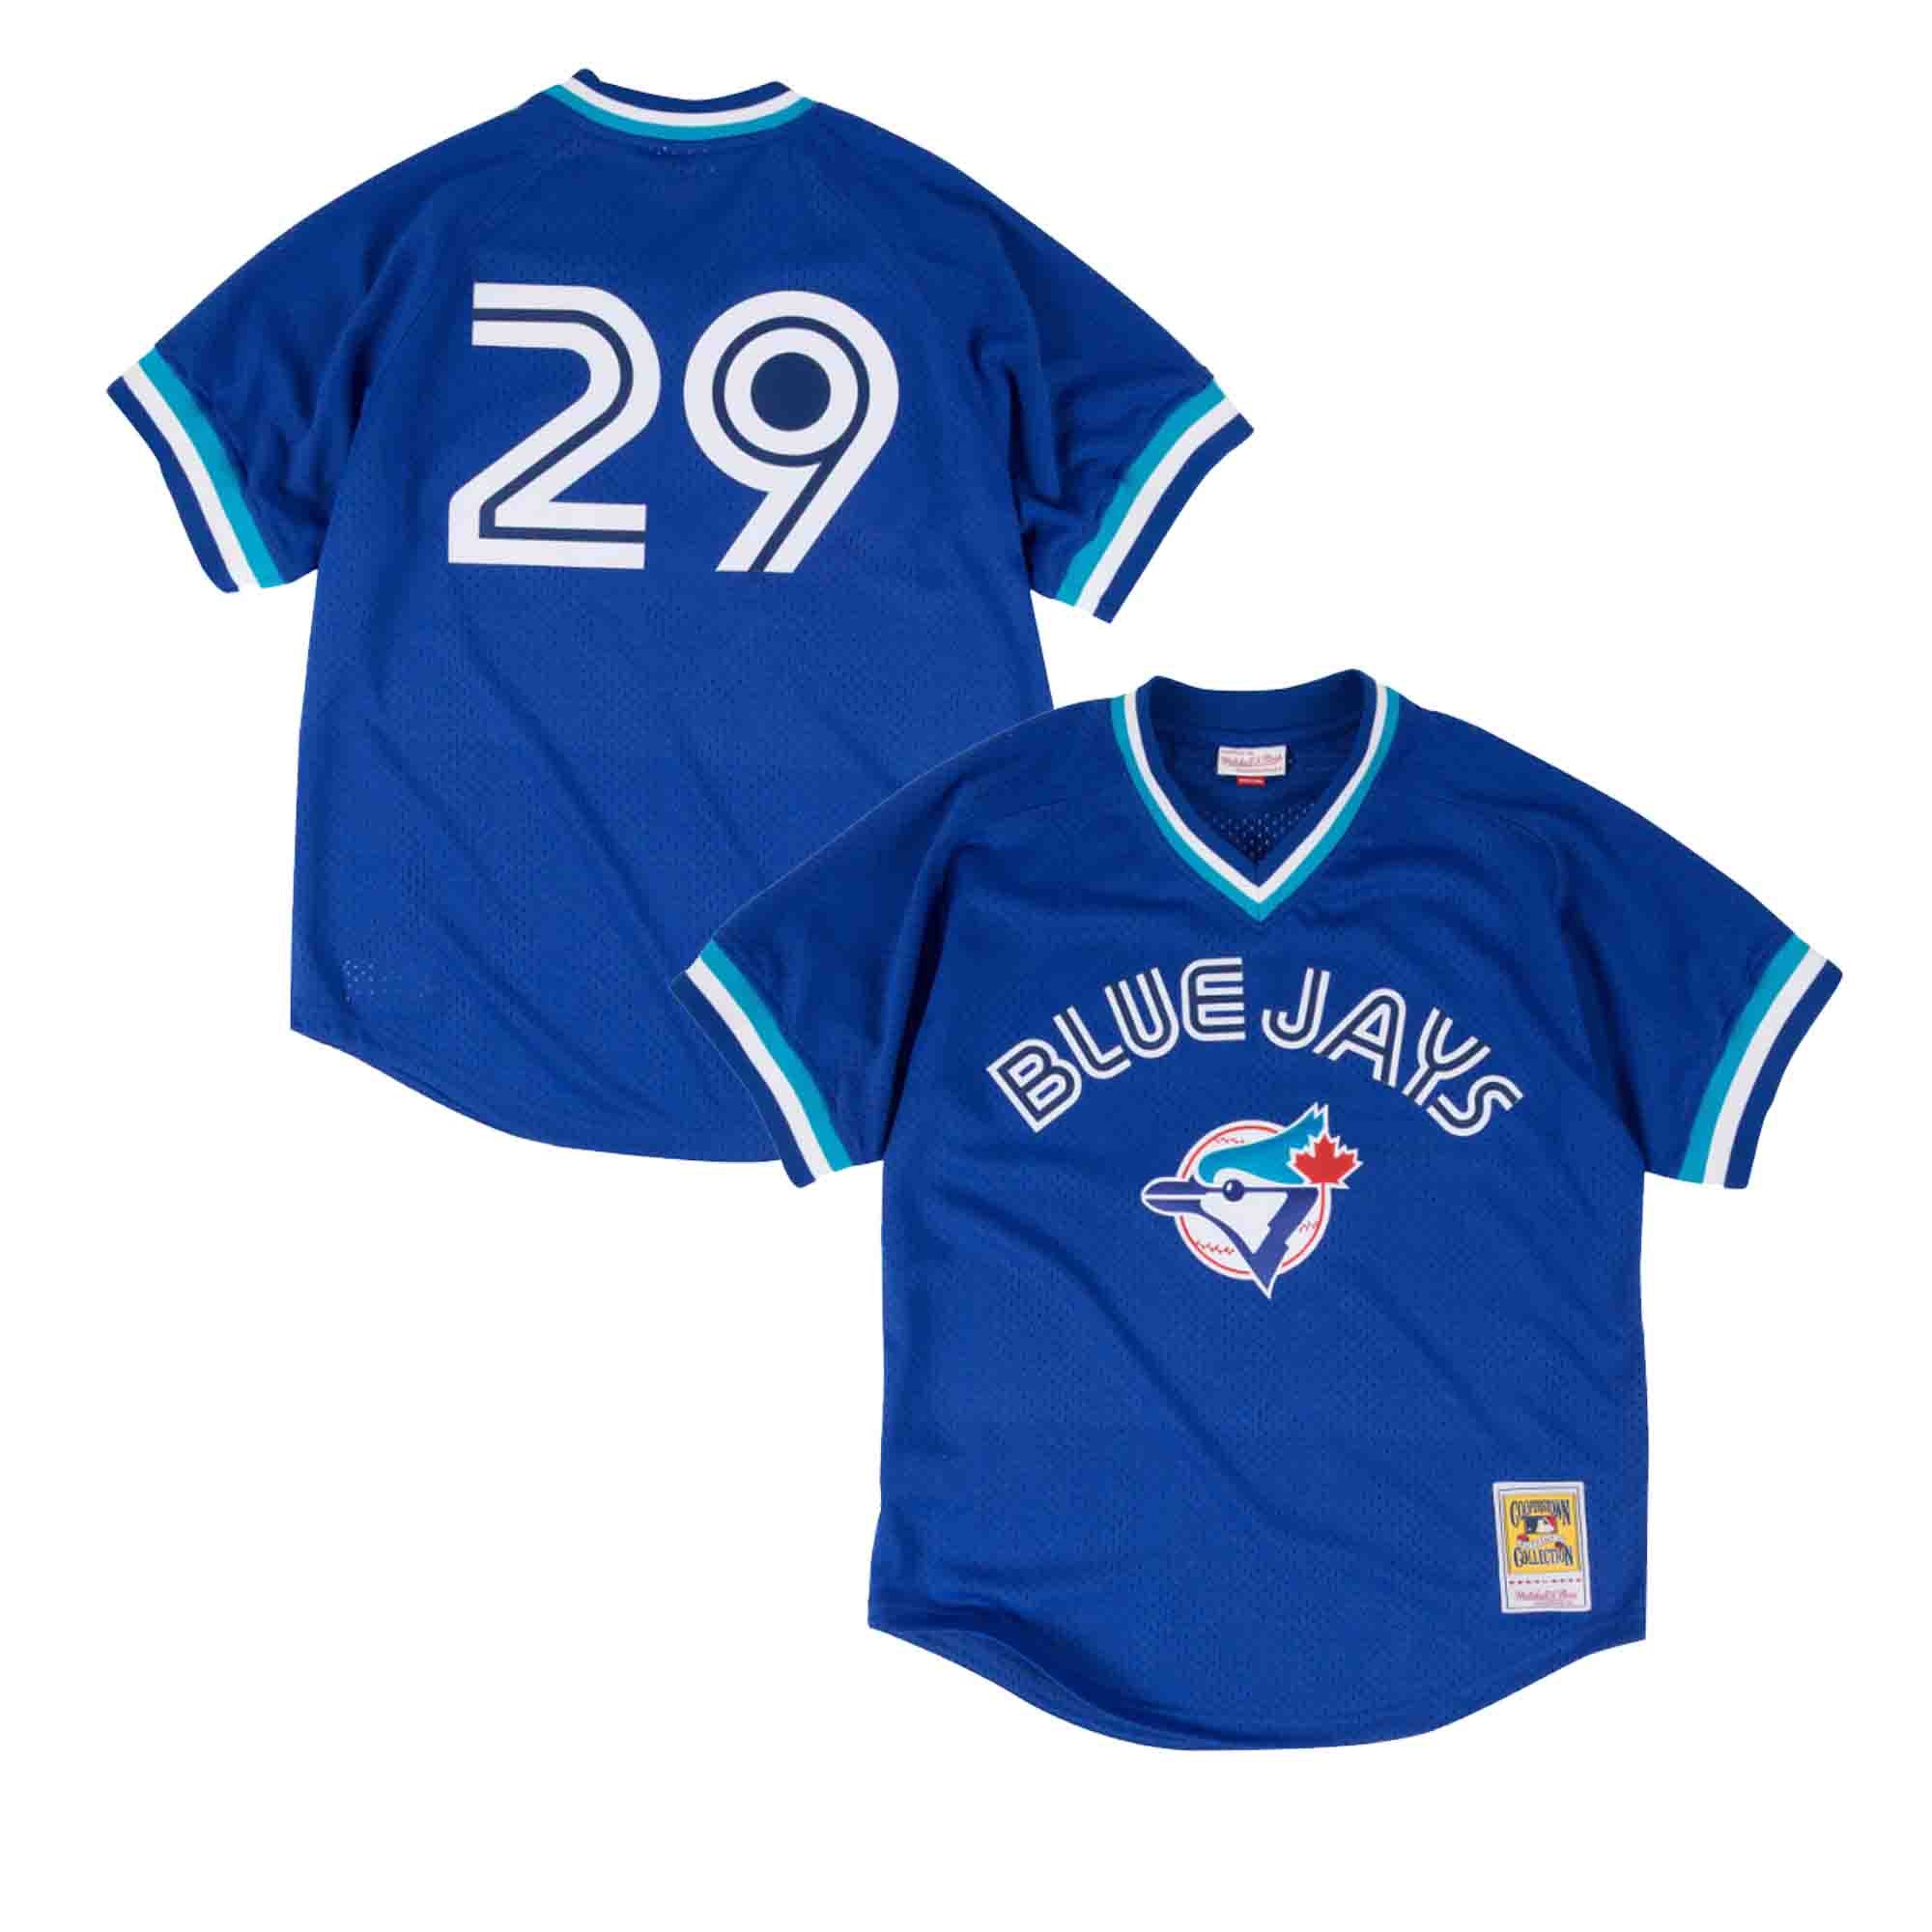 Authentic MLB Jersey VS Replica,Cheap Authentic MLB Jerseys,Joe Carter  Toronto Blue Jays 1993 Authentic Cooperstown Collection